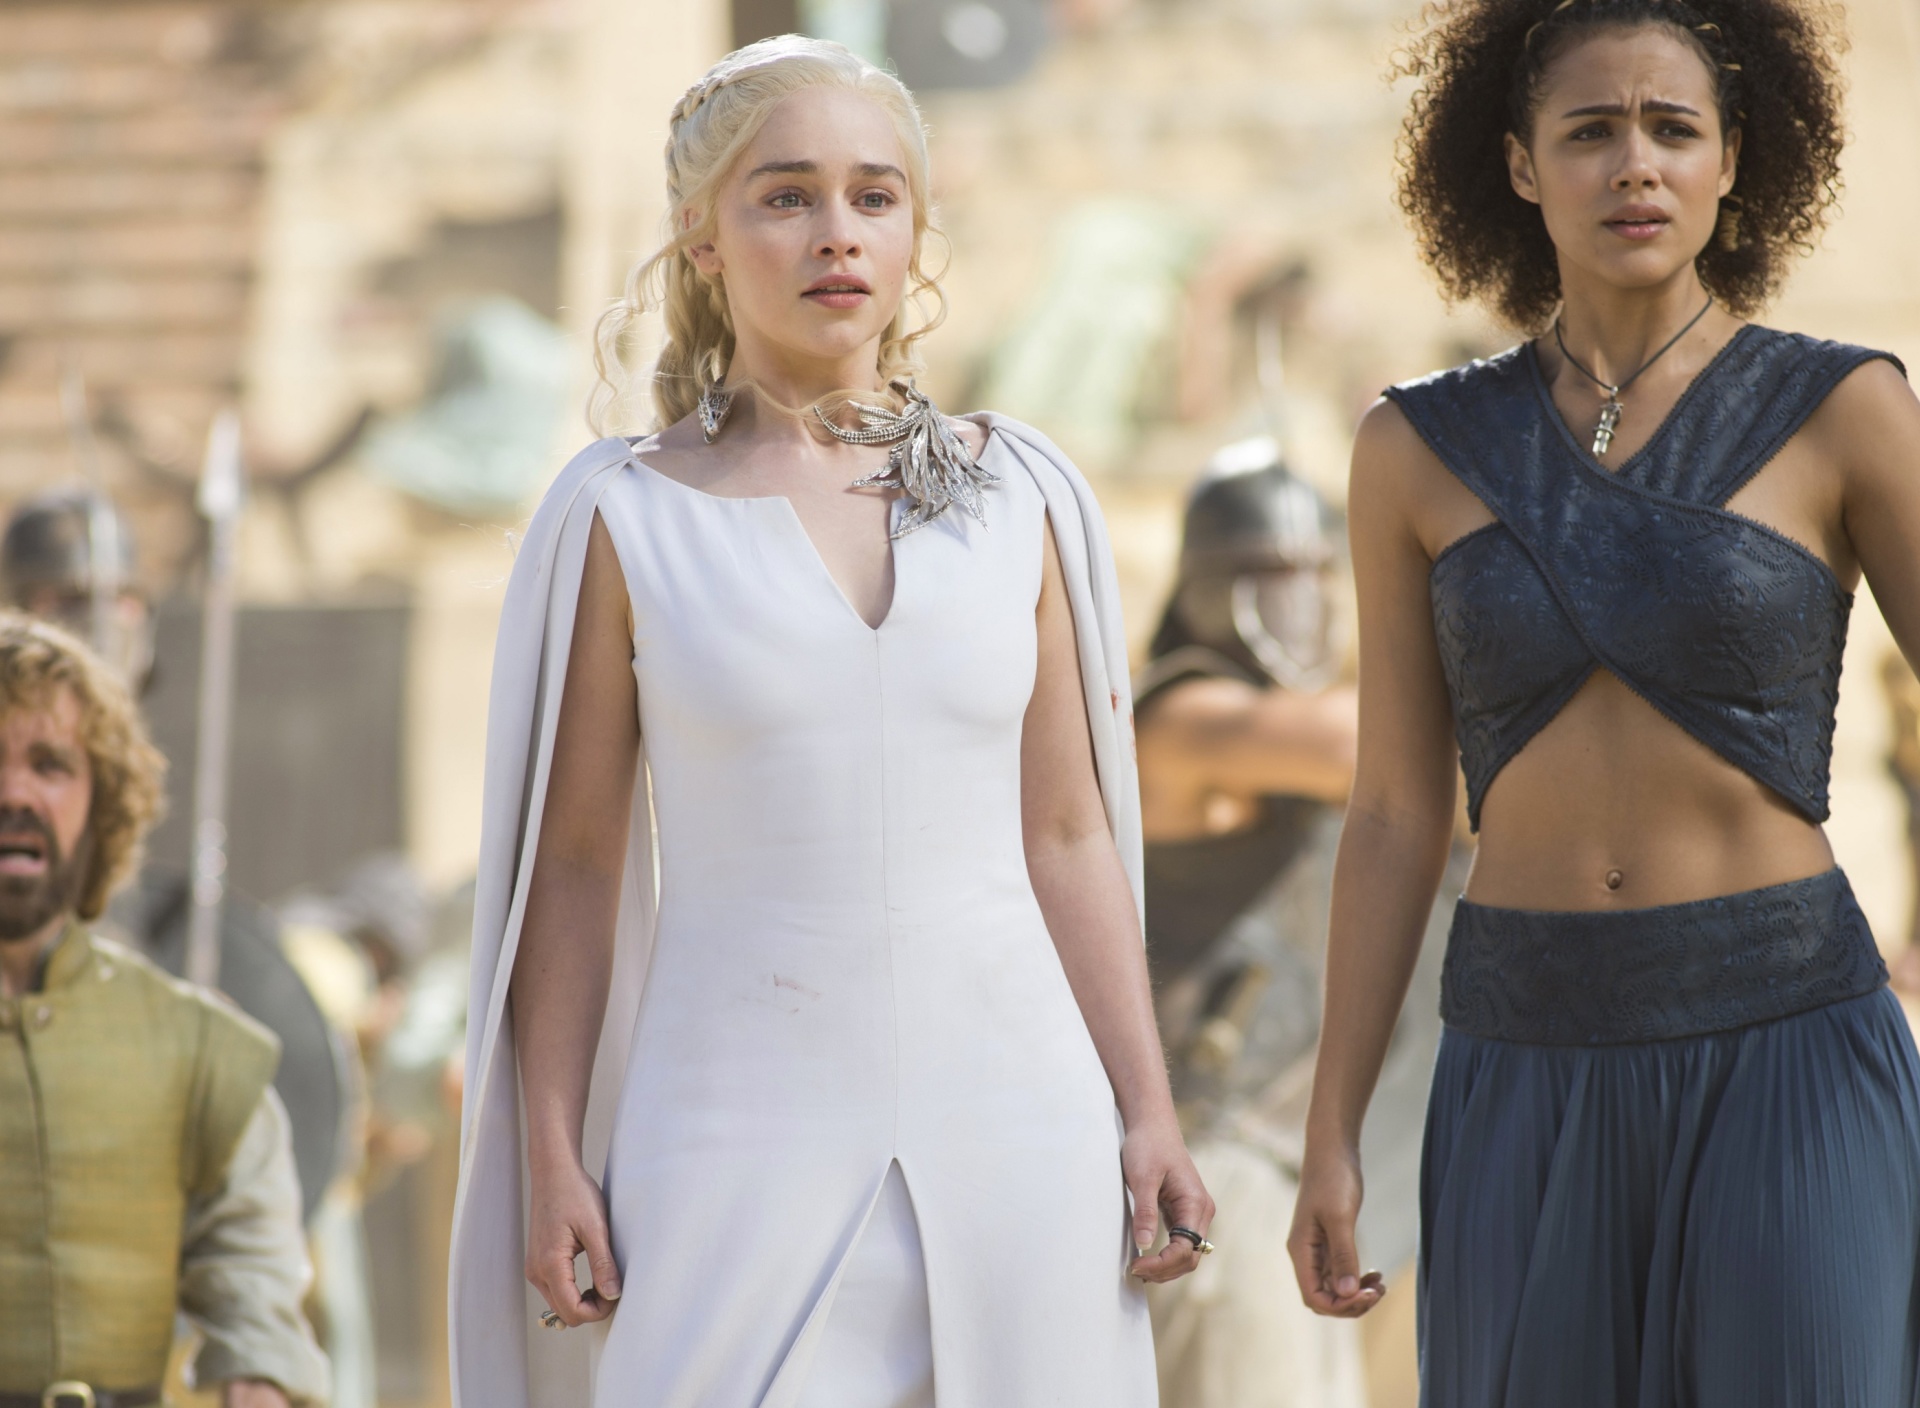 Game Of Thrones Emilia Clarke and Nathalie Emmanuel as Missandei wallpaper 1920x1408